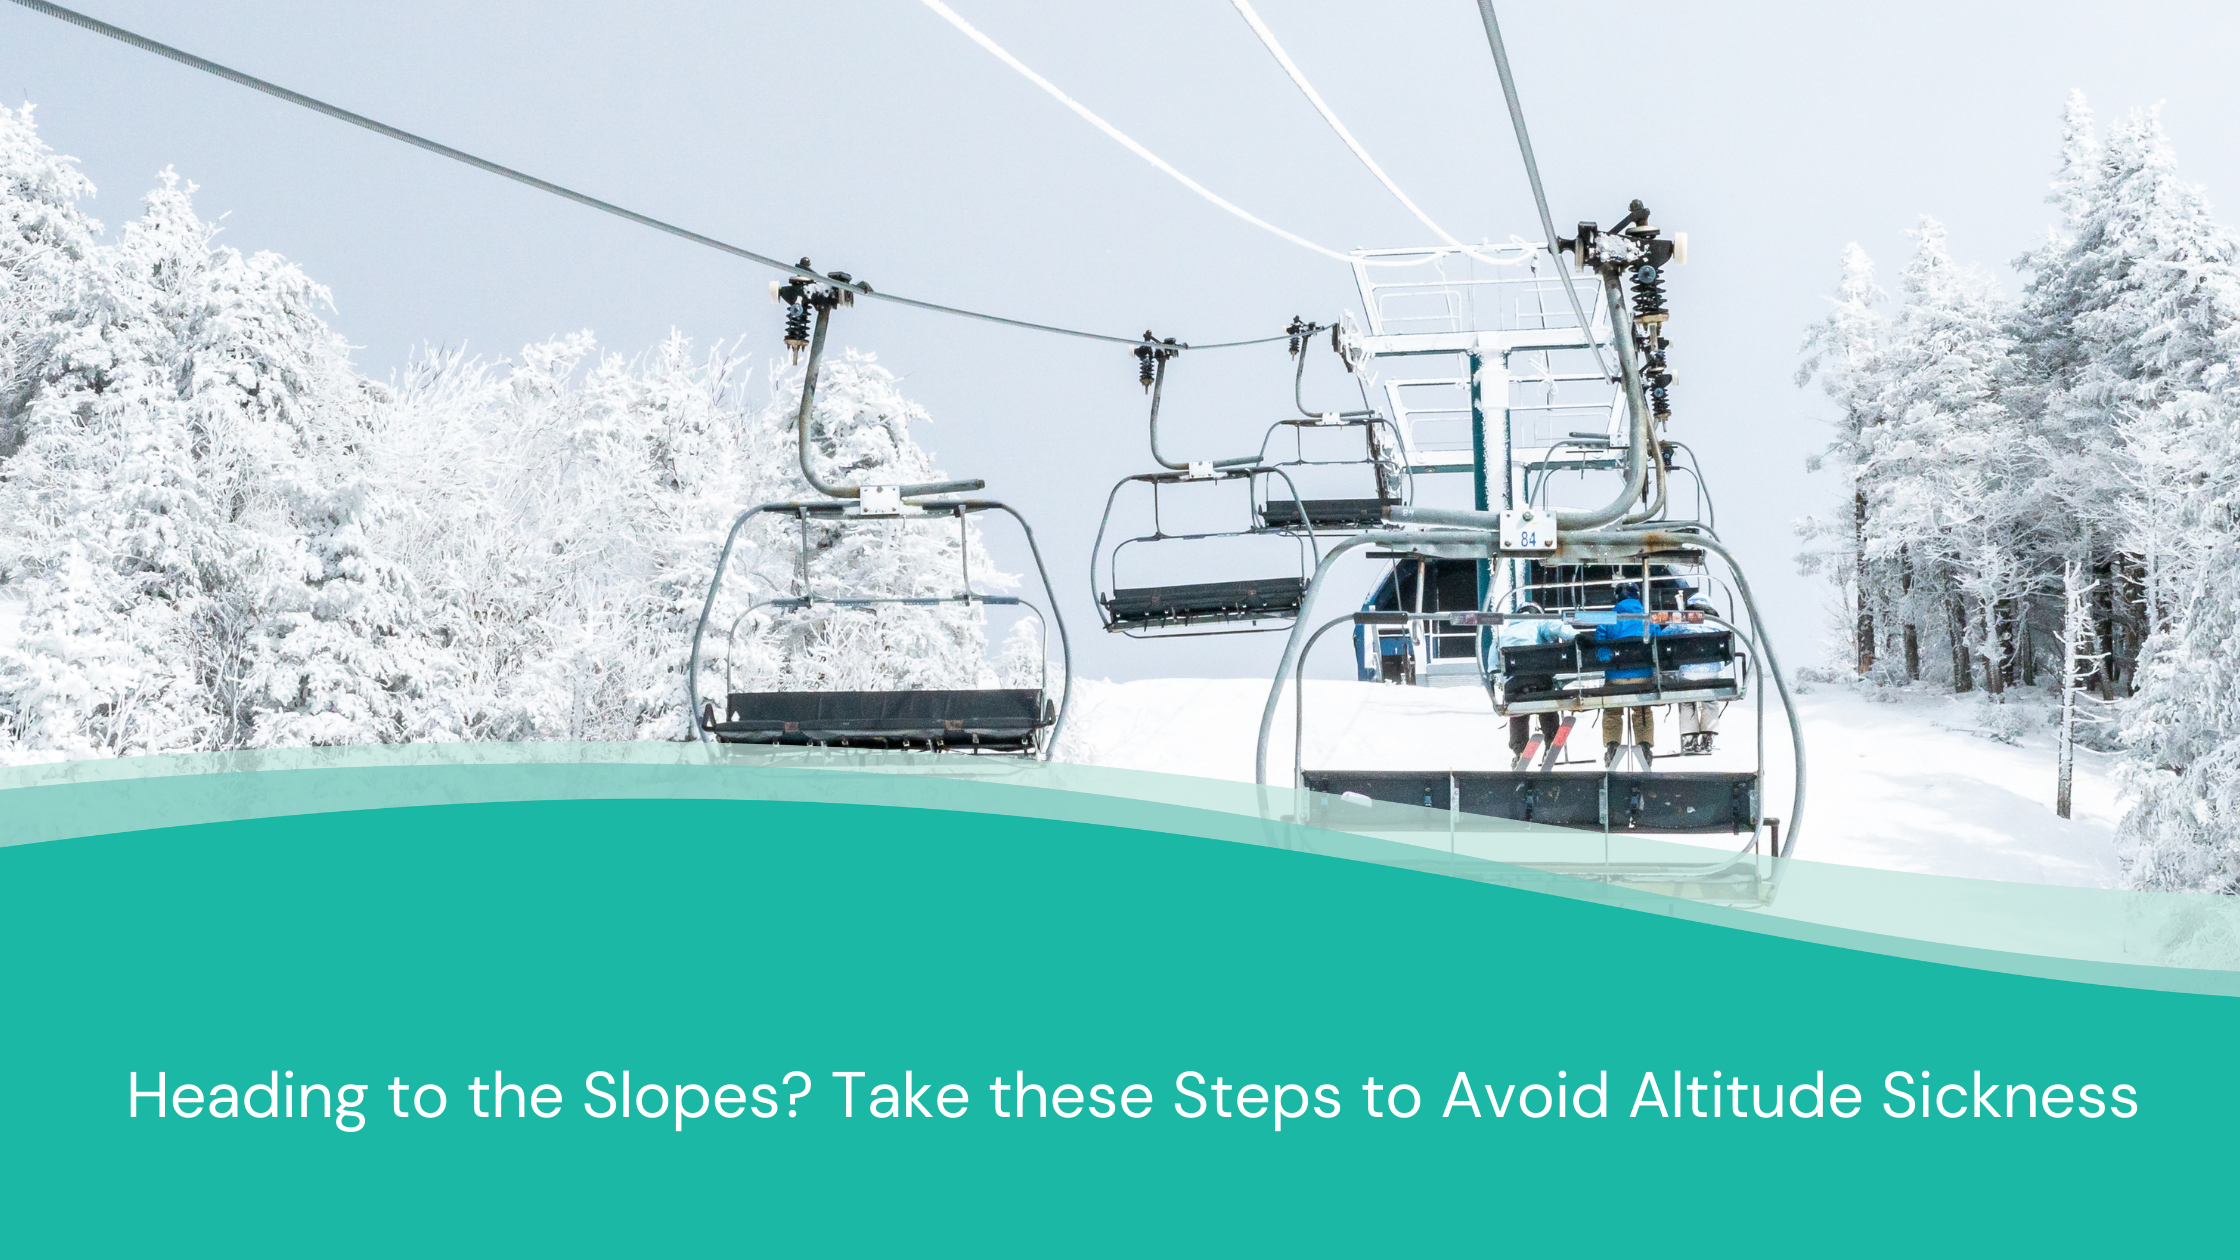 Heading to the Slopes? Take these Steps to Avoid Altitude Sickness